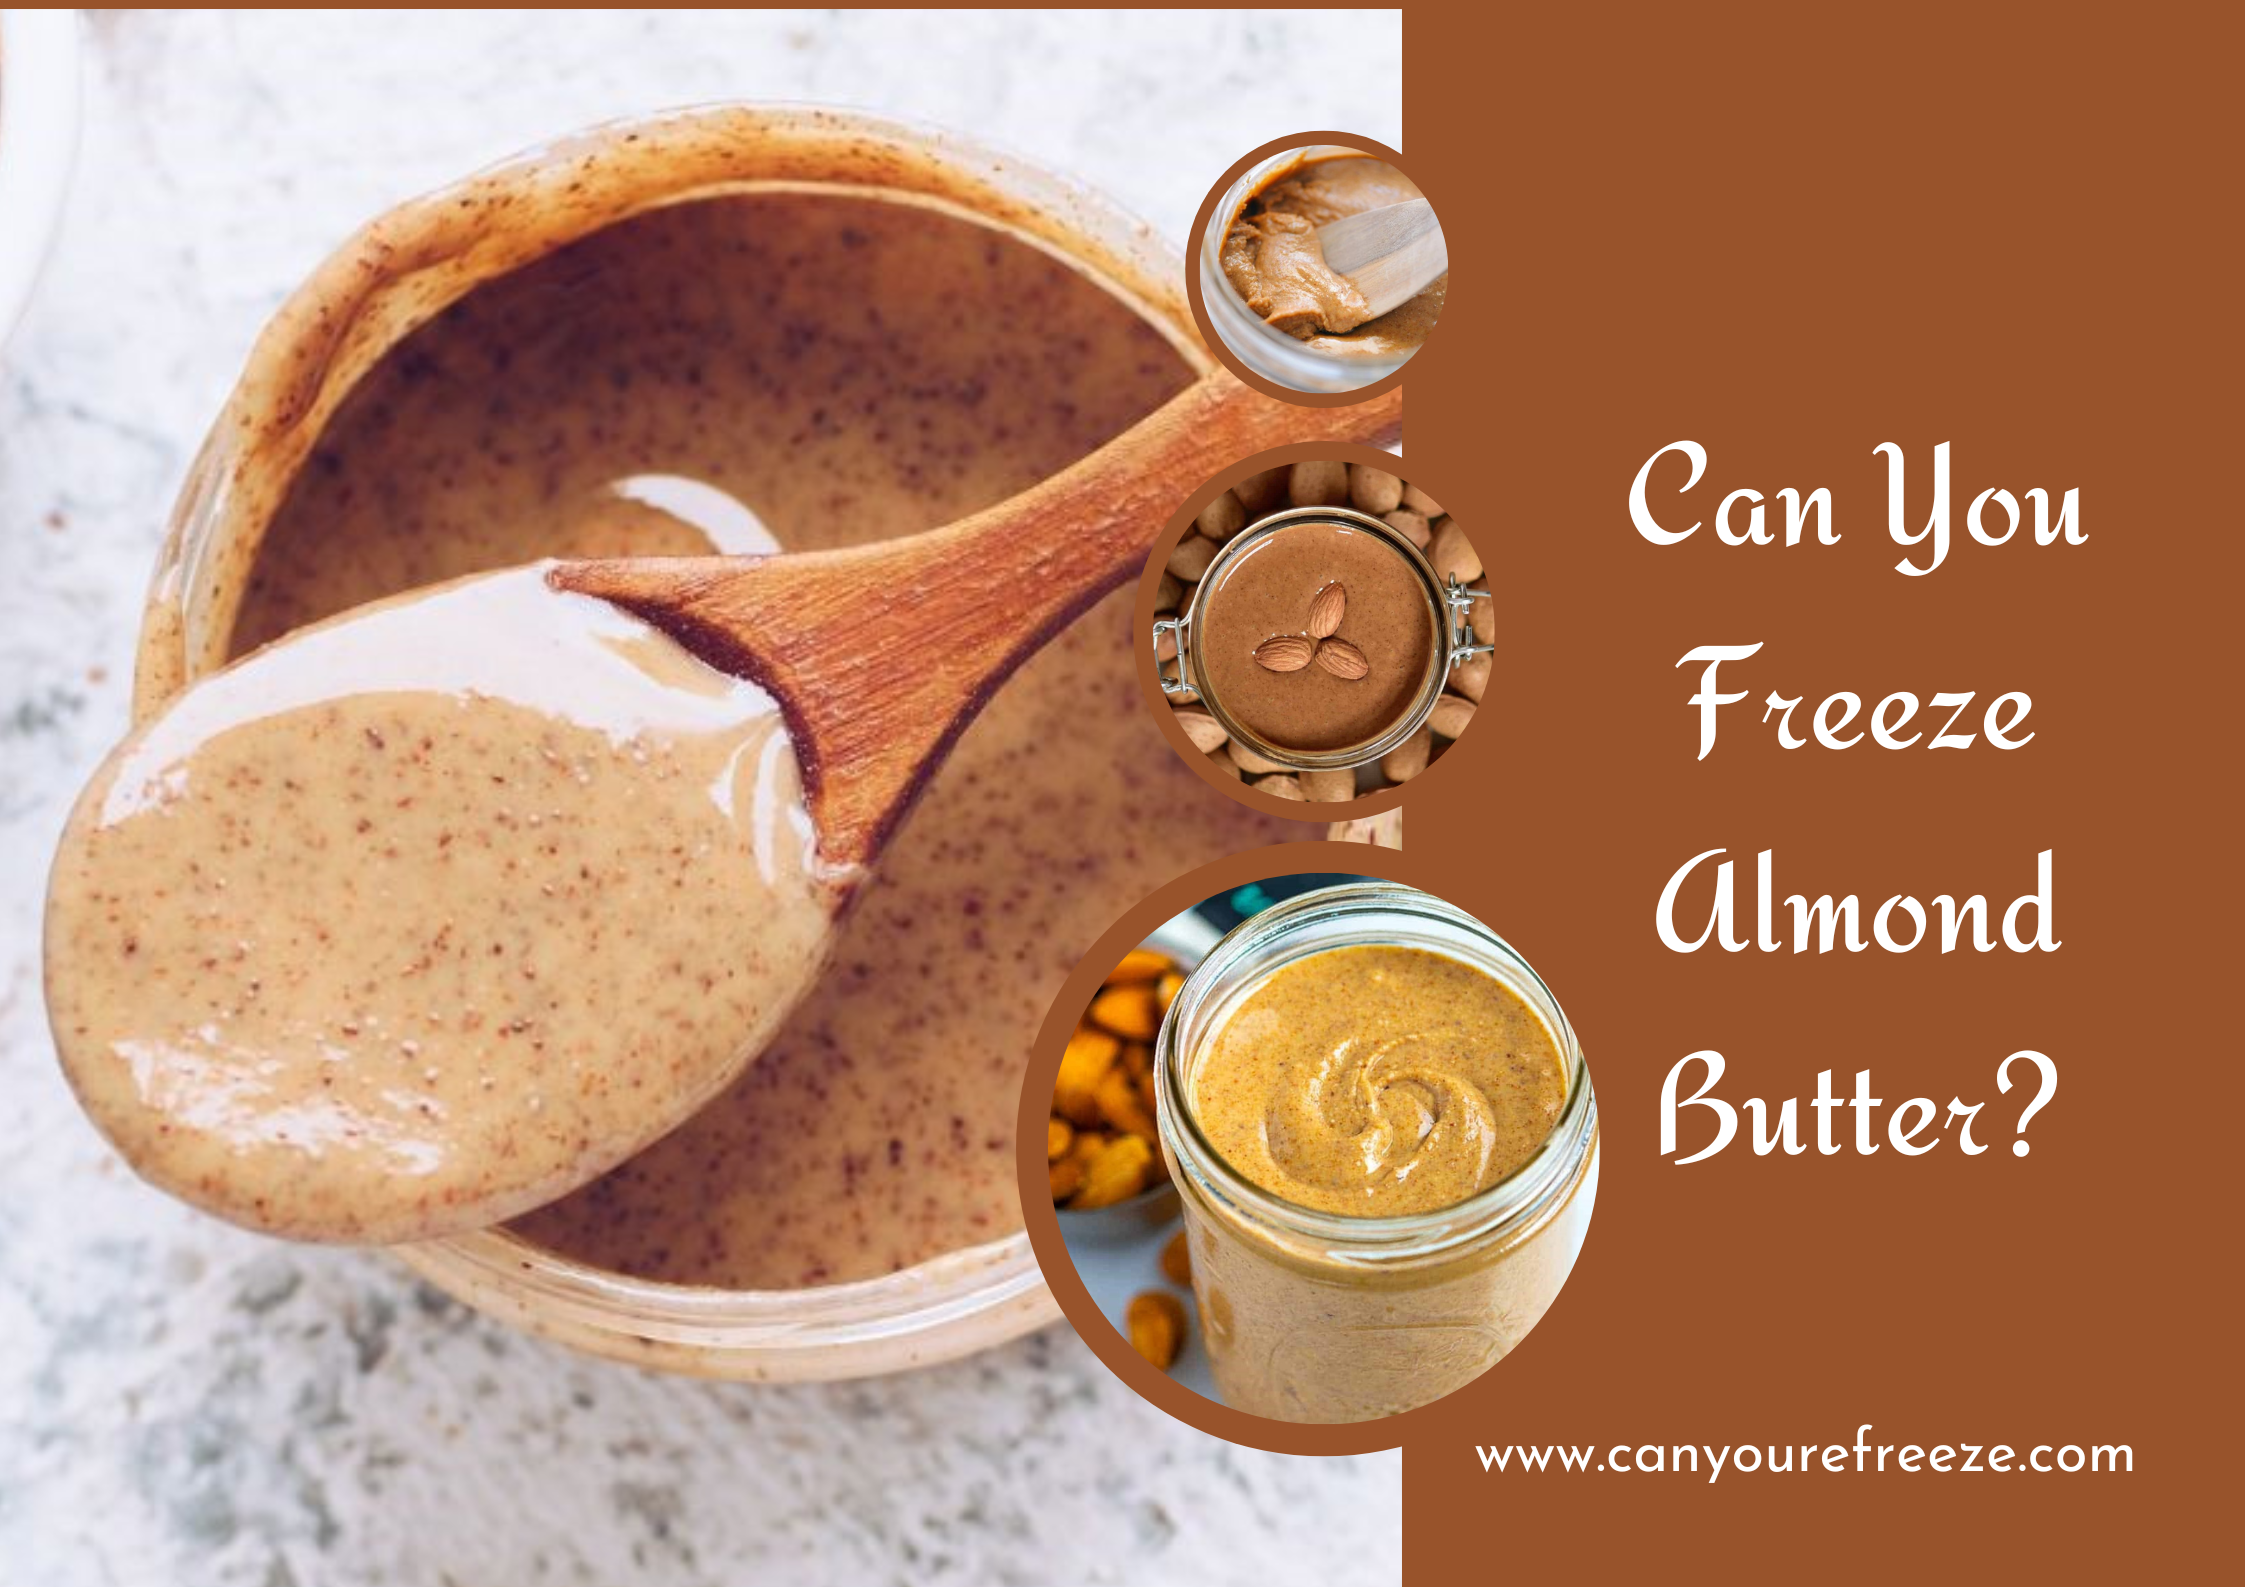 Can You Freeze Almond Butter